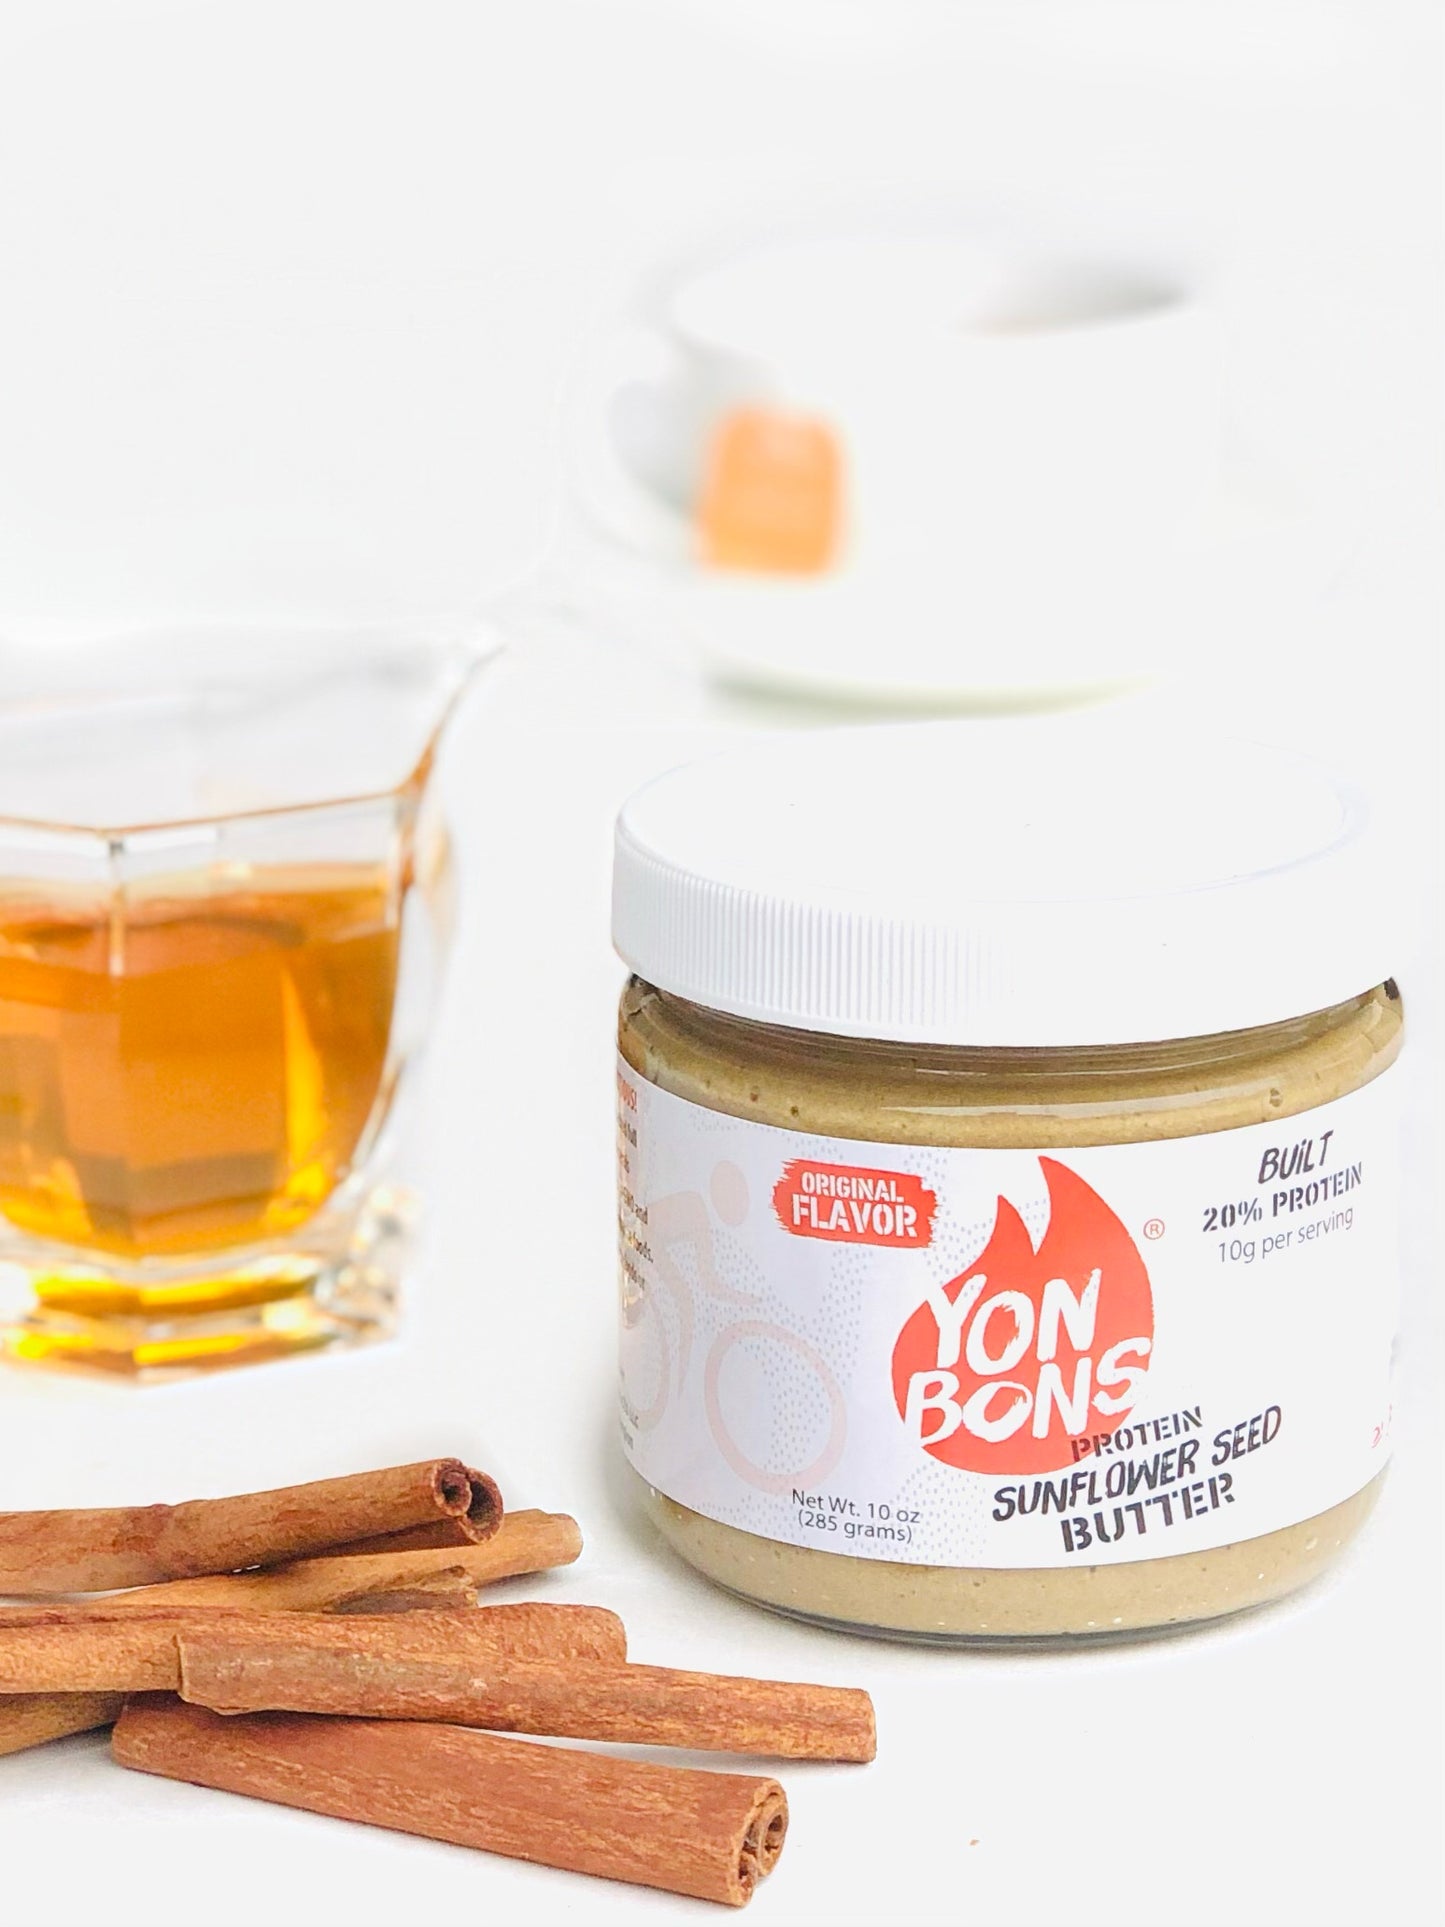 Protein Sunflower Seed Butter